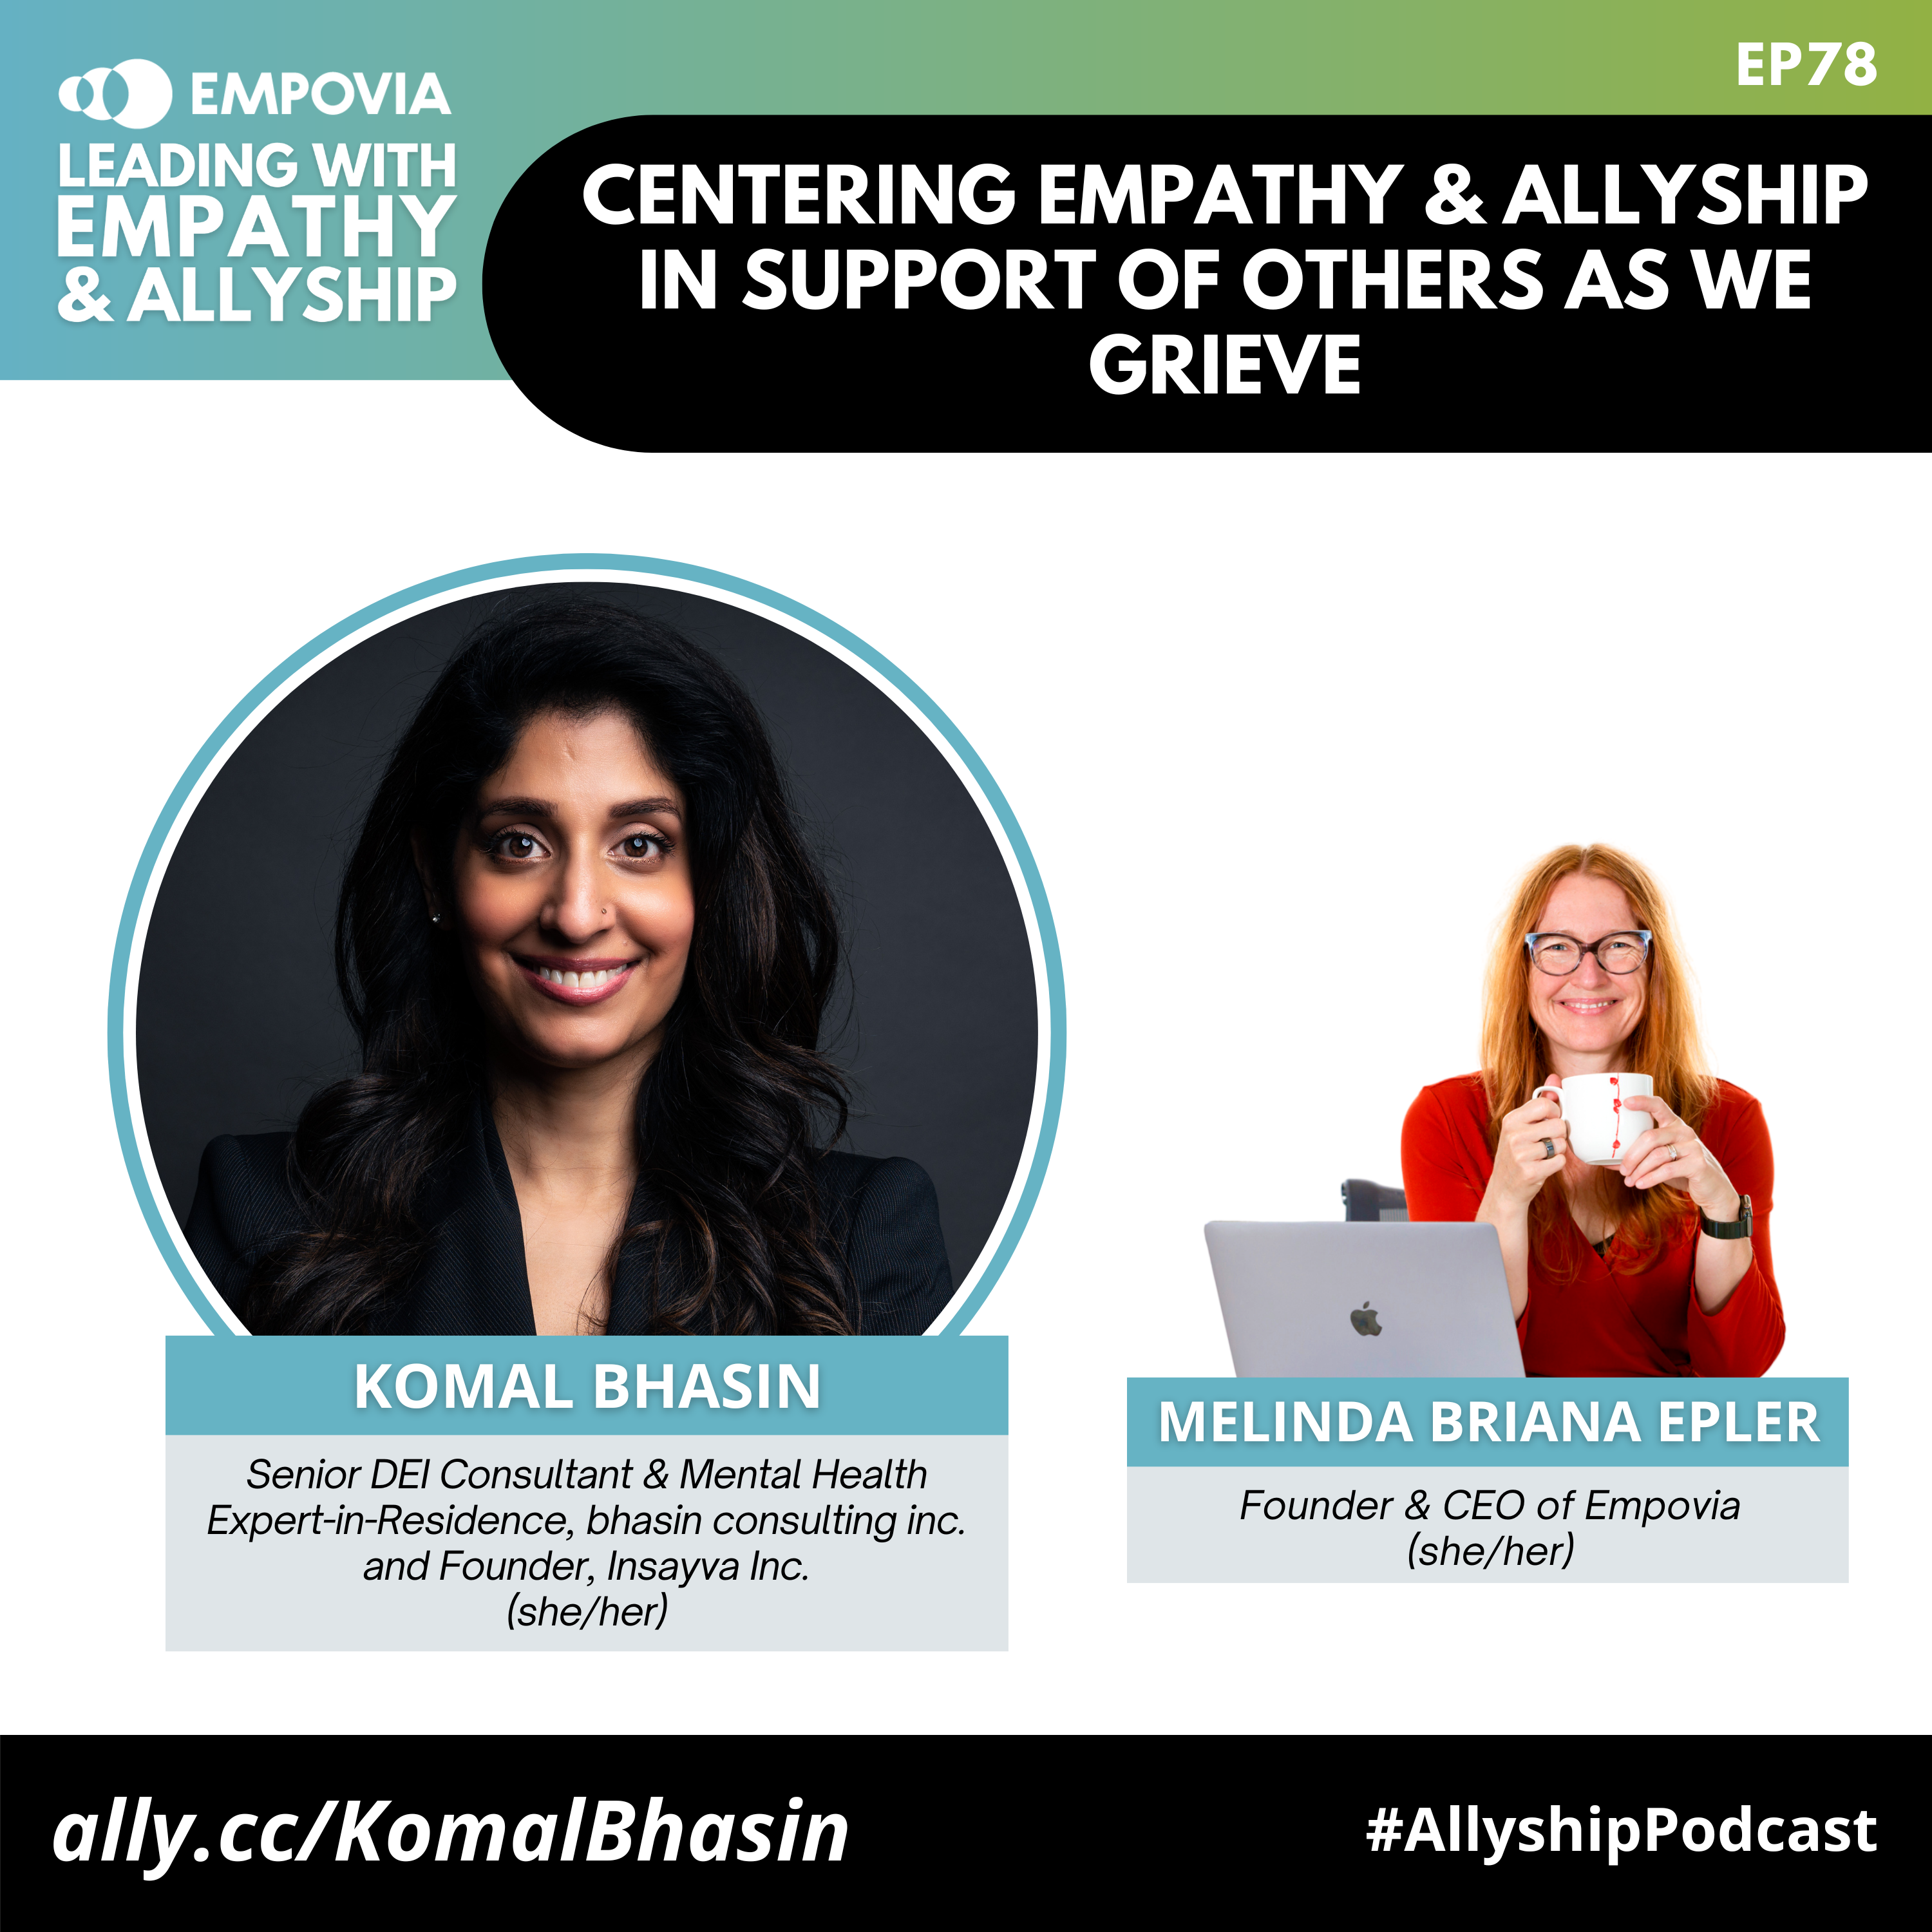 Leading With Empathy & Allyship promo with the Empovia logo and photos of Sherrell Dorsey, a Black woman with black hair in twists, silver and green statement earrings, and a yellow suit; beside her is the blue book cover of UPPER HAND: The Future of Work for the Rest of Us; and host Melinda Briana Epler, a White woman with red hair, glasses, and orange shirt holding a white mug behind a laptop.